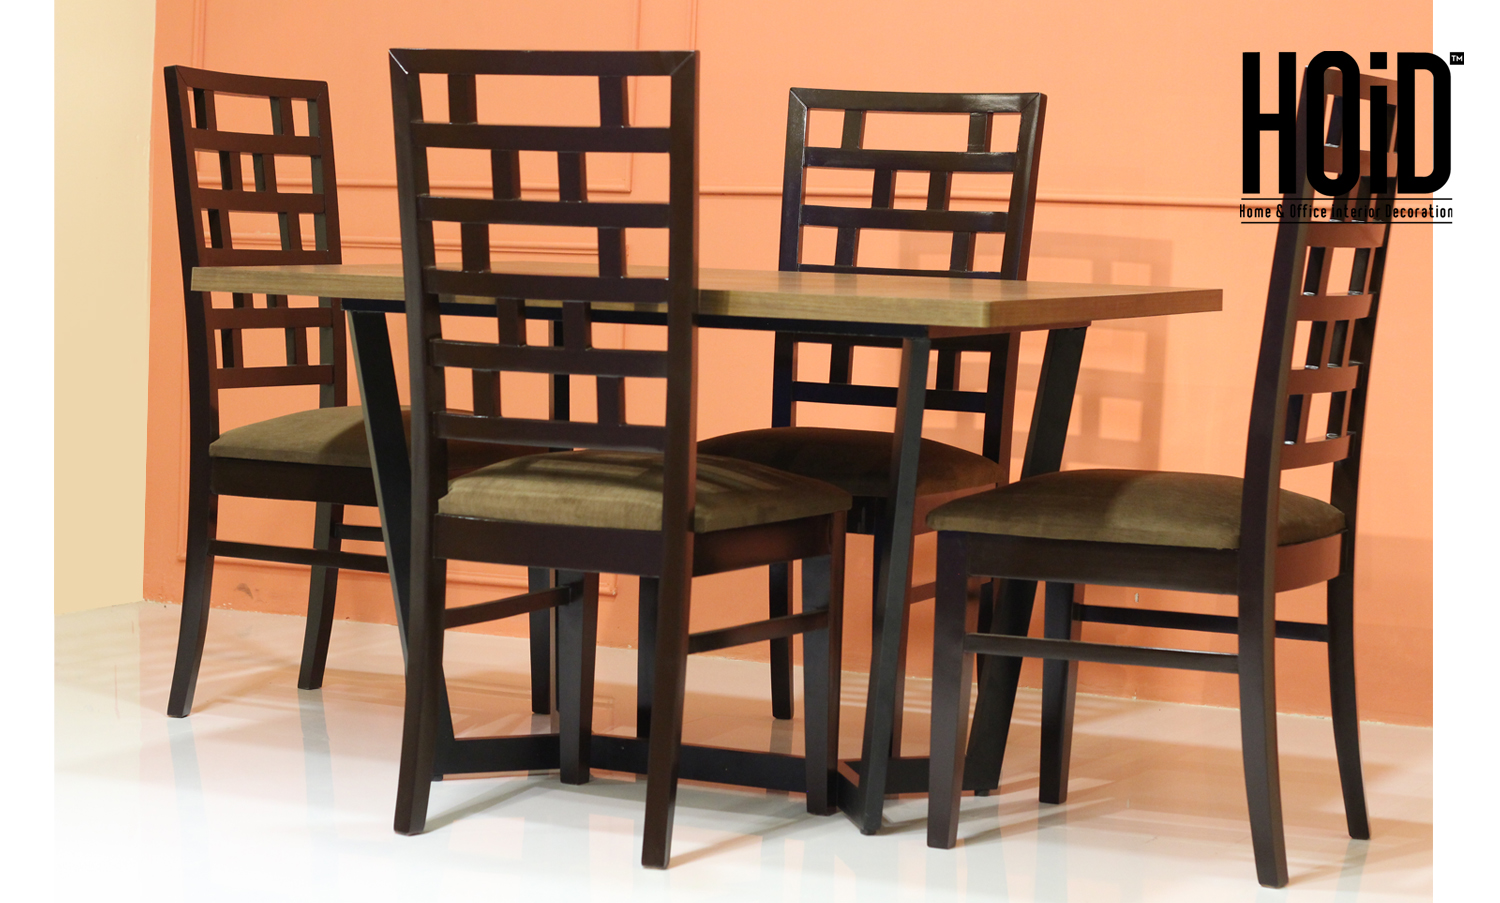 nosot-dining-4-chairs-01-1.jpg